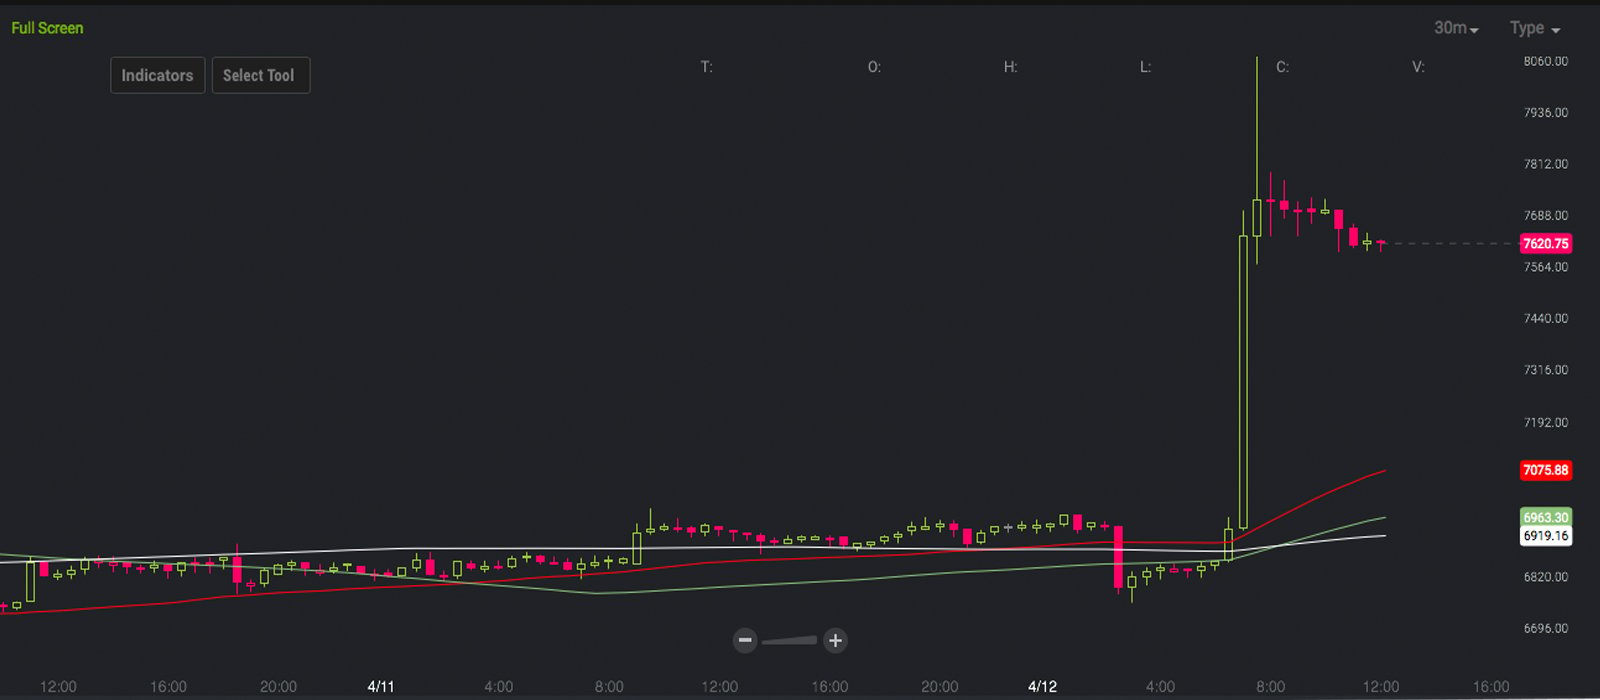 Markets Update: BTC Price Jumps Over $1000 in Less Than an Hour